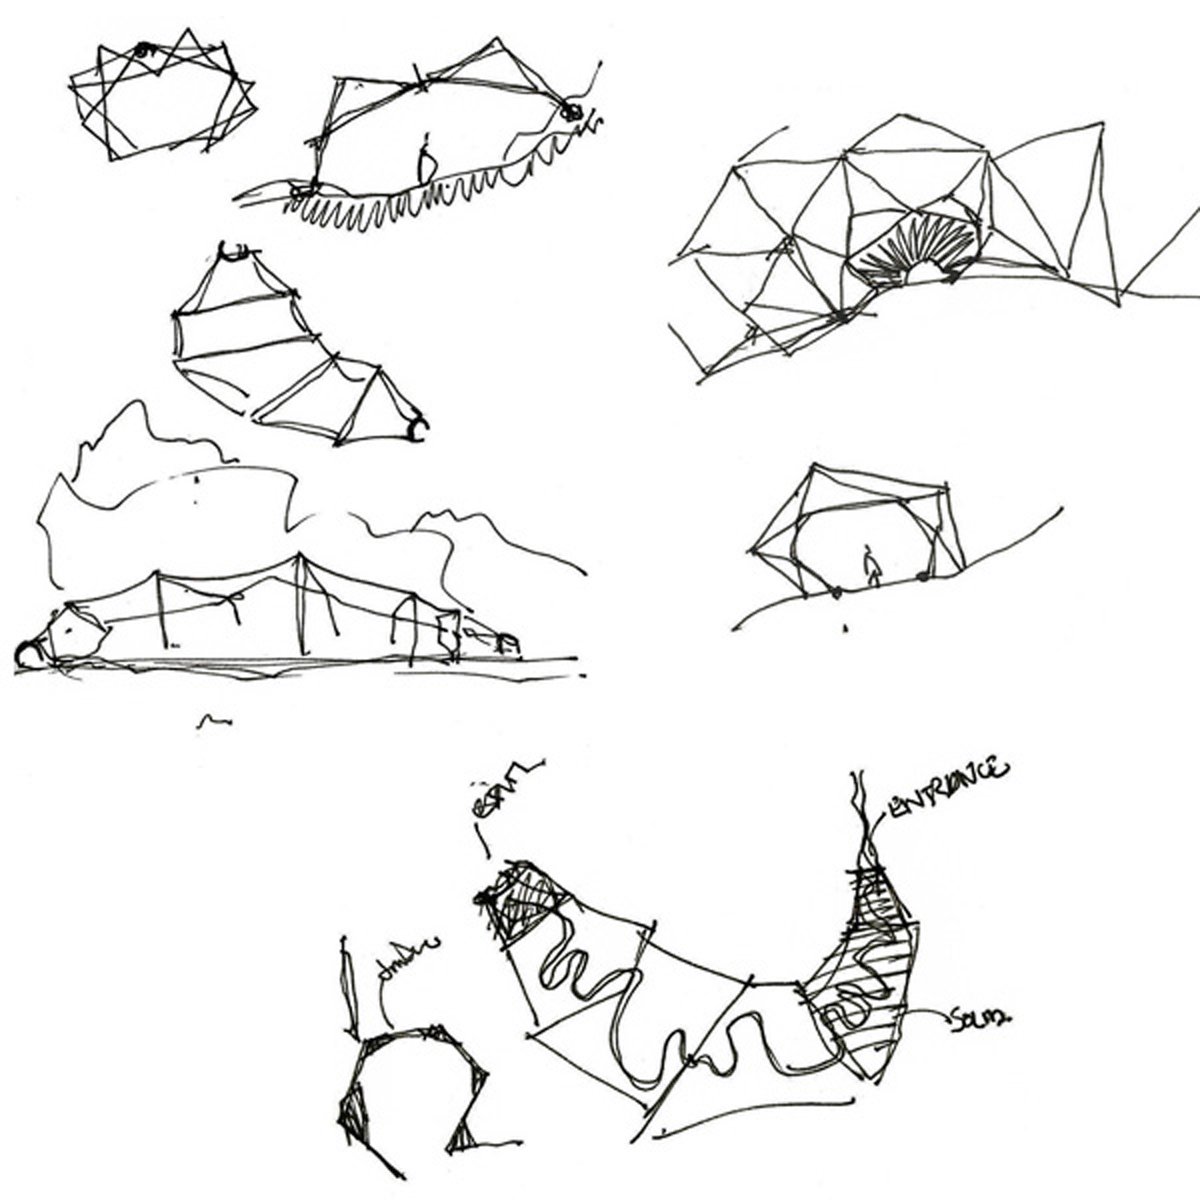 Sketches of enclosures at Sikkim Butterfly Reserve